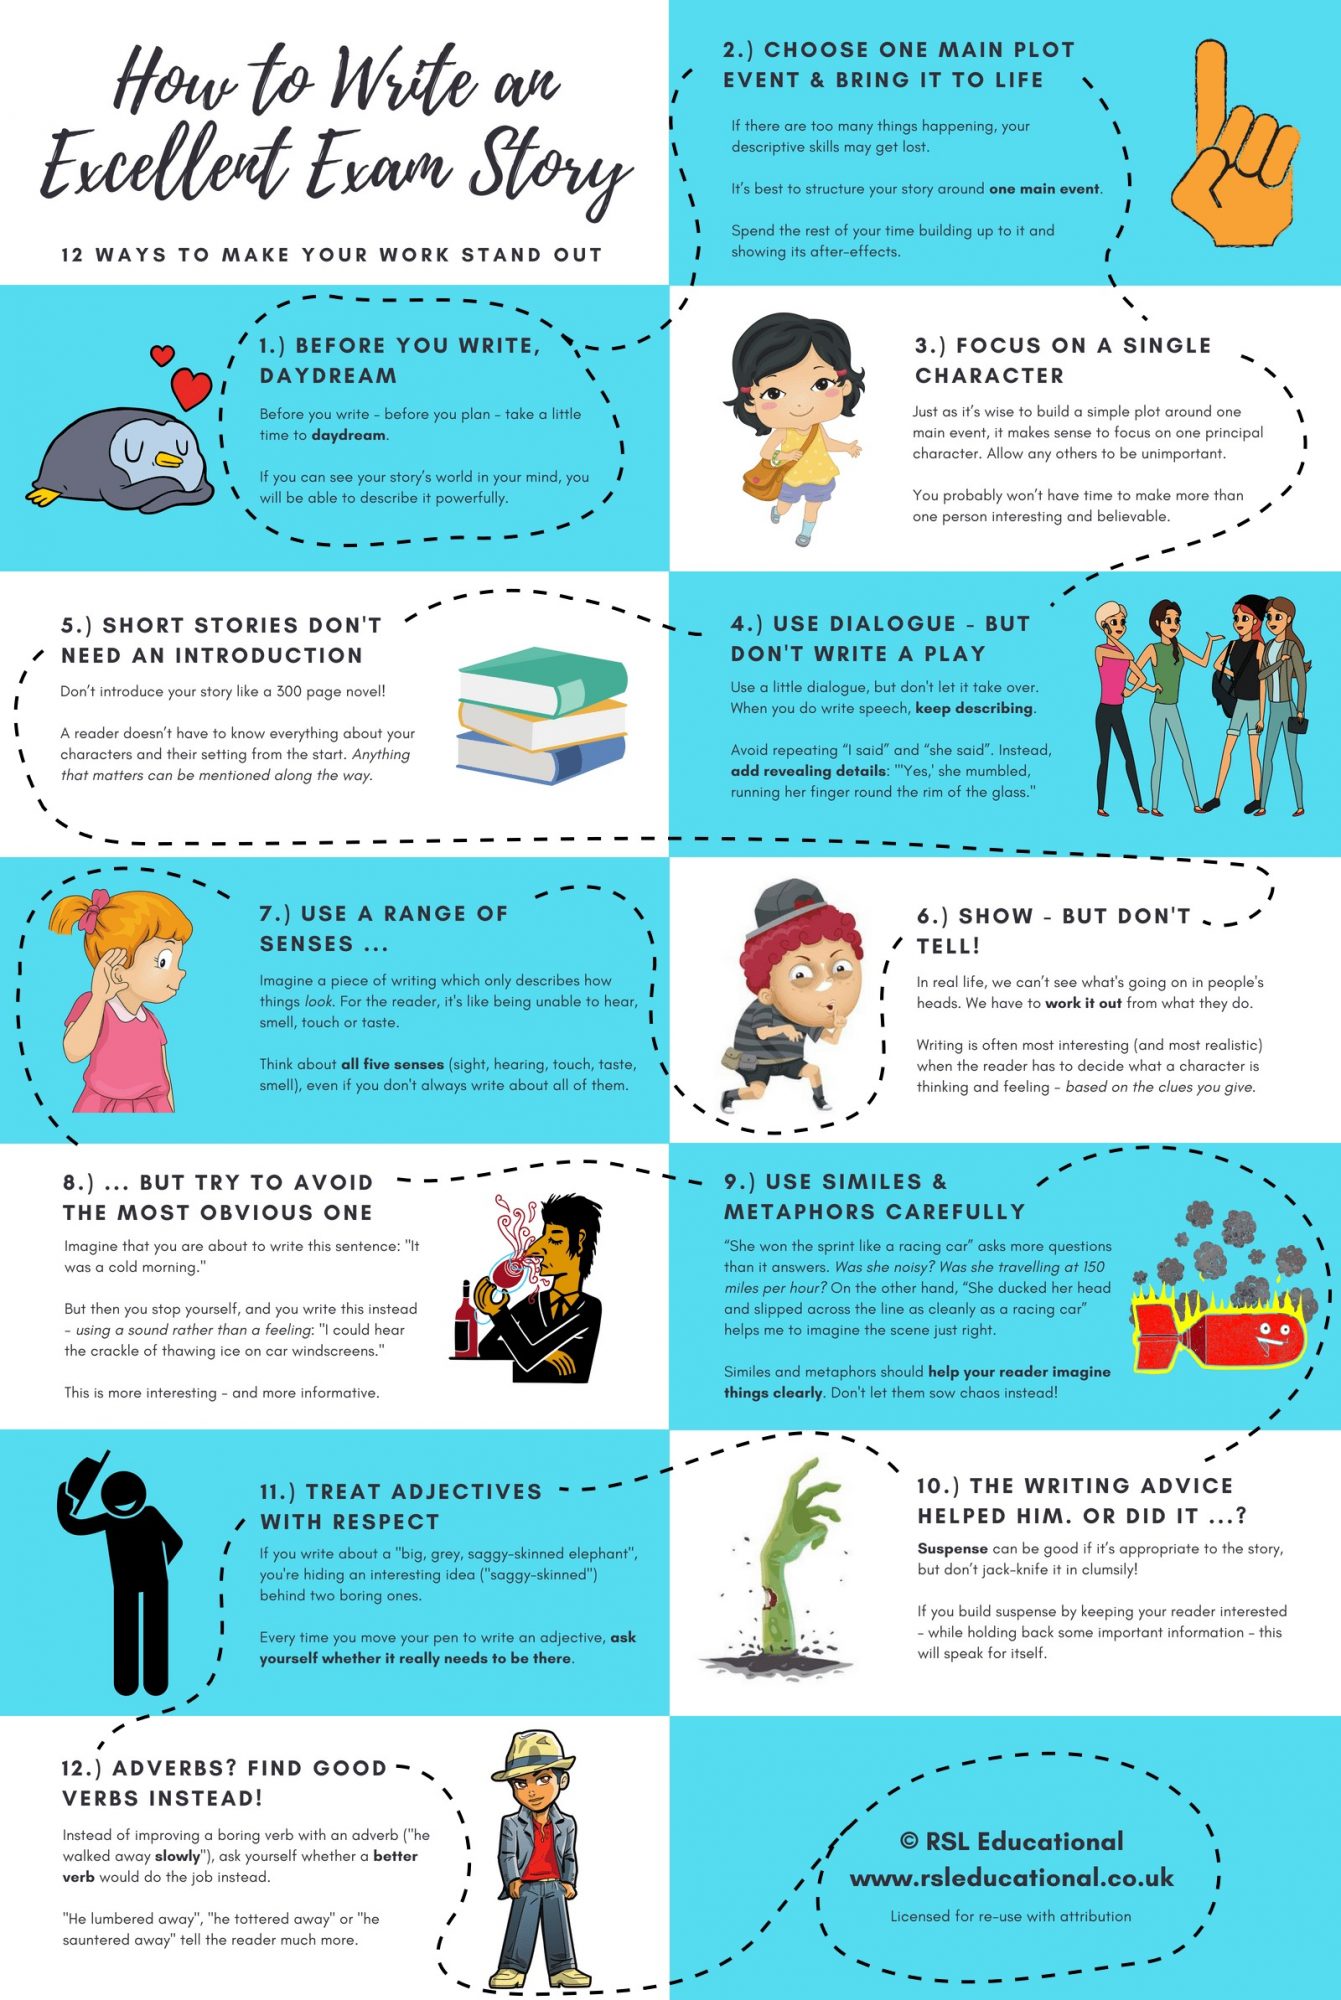 12 Steps For Excellent Exam Creative Writing